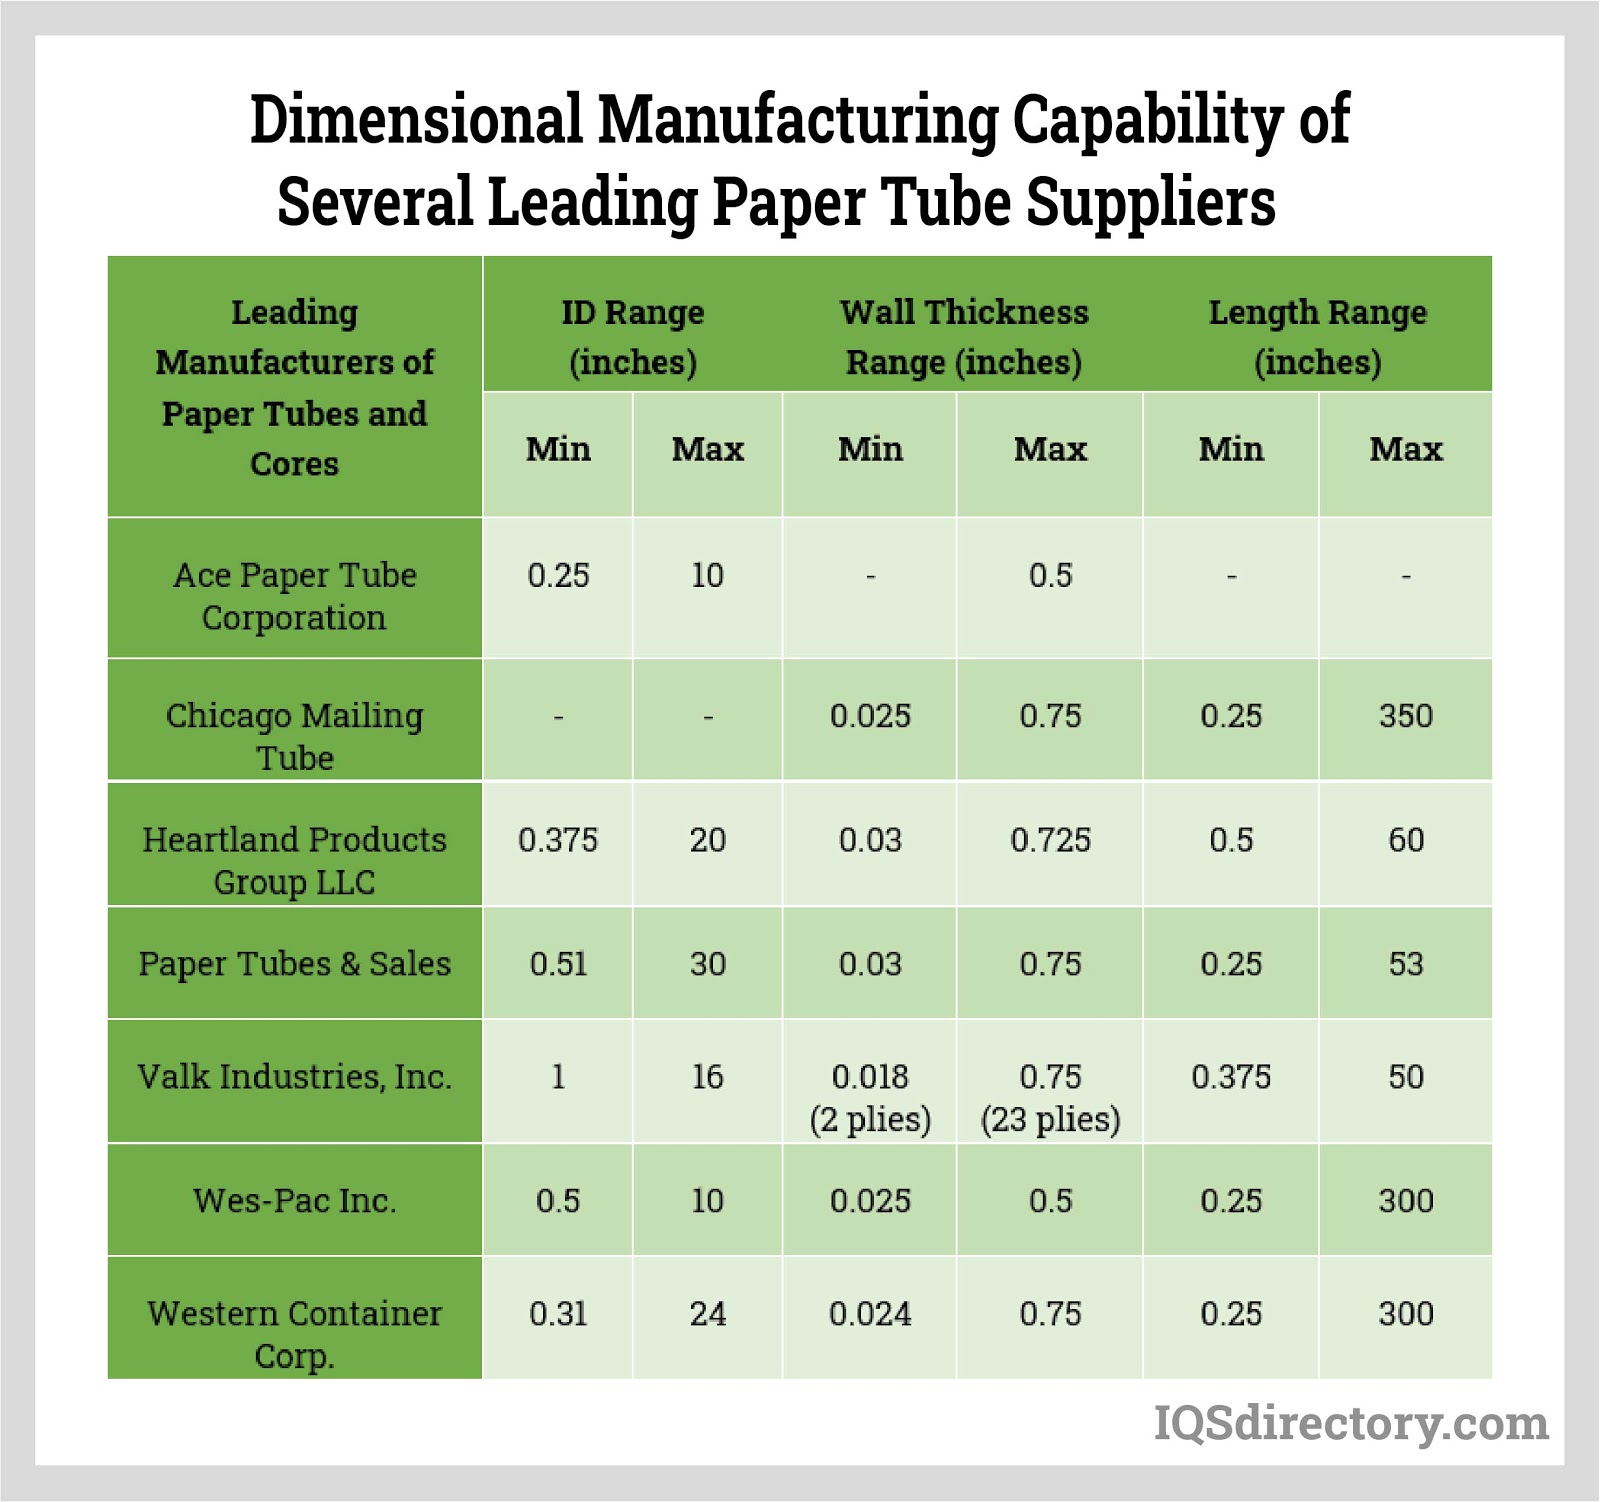 Dimensional Manufacturing Capability of Several Leading Paper Tube Suppliers